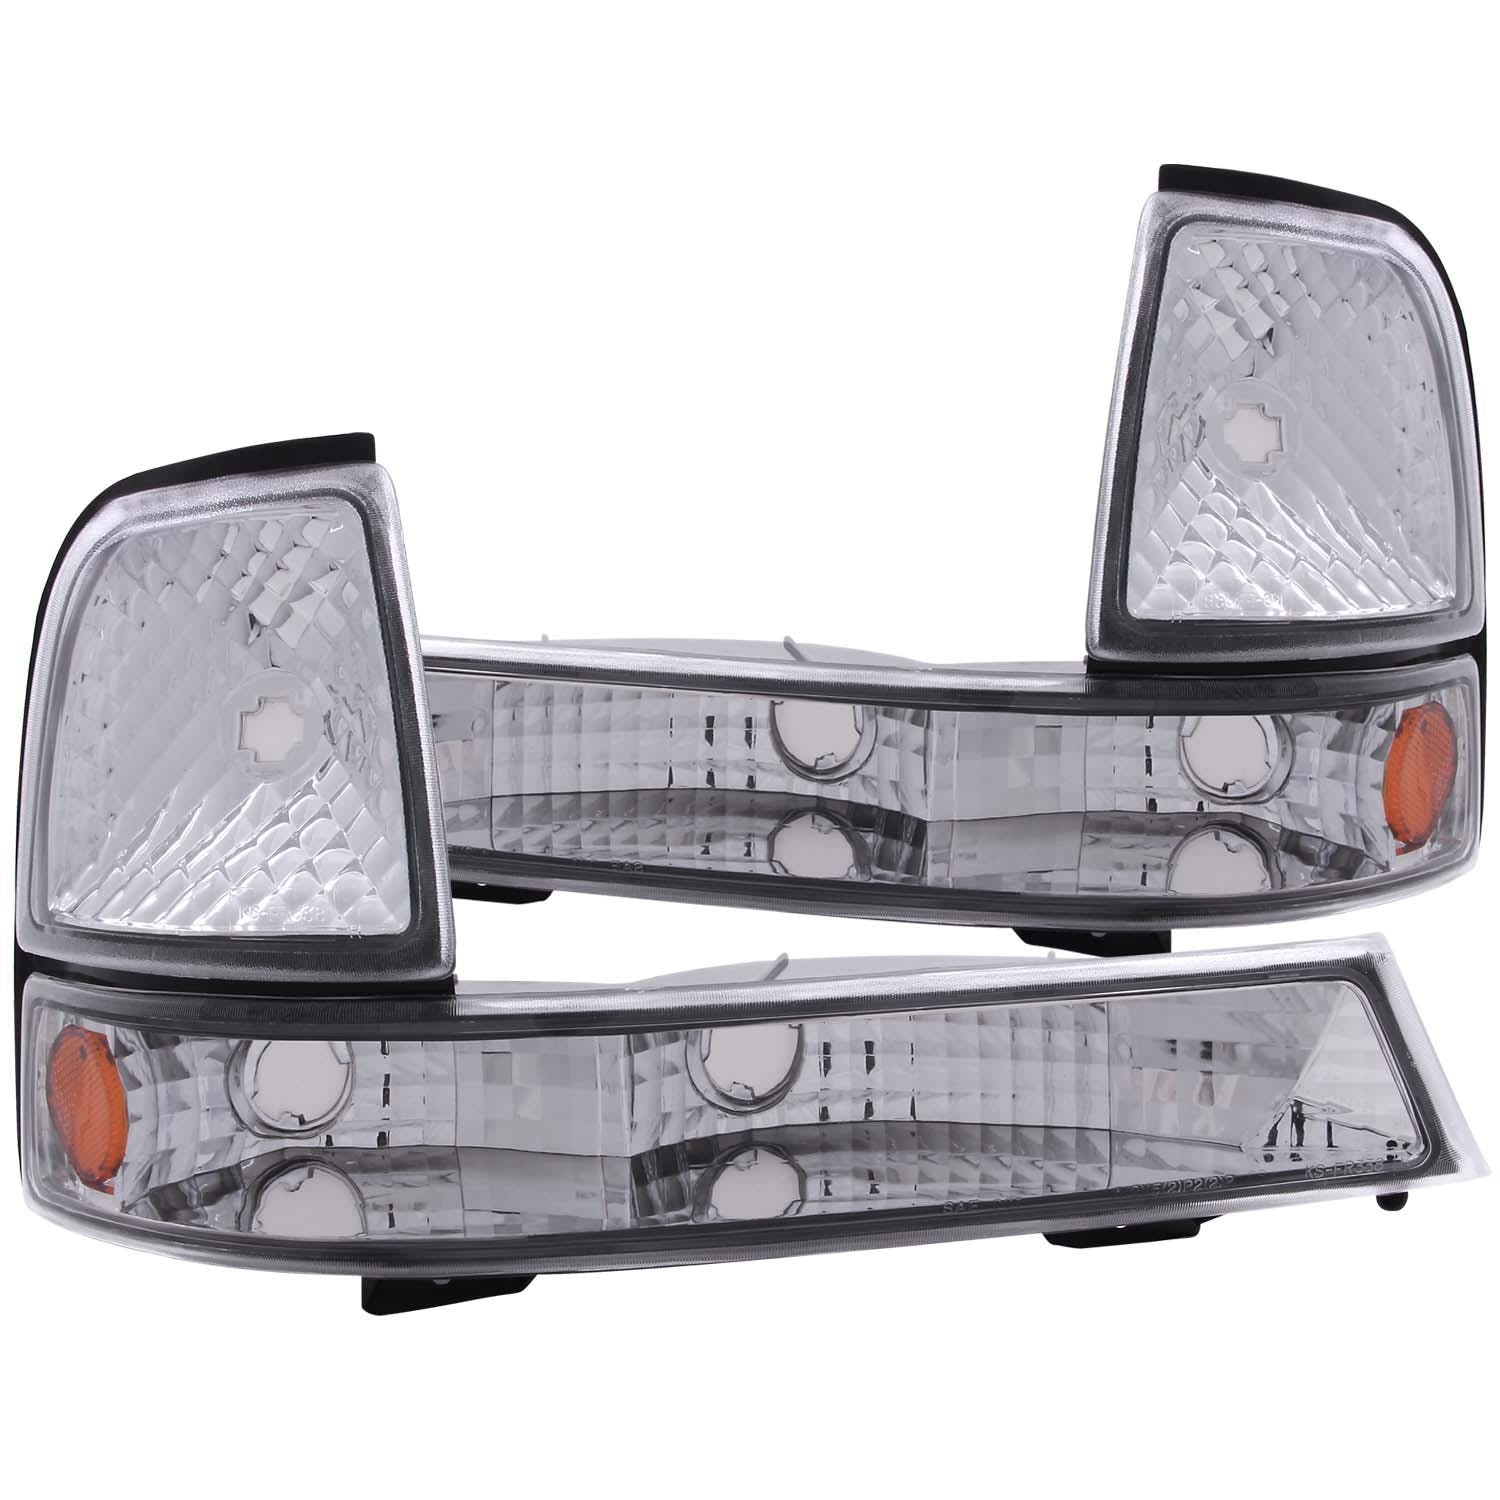 AnzoUSA 511003 Euro Parking Lights Chrome with Amber Reflector